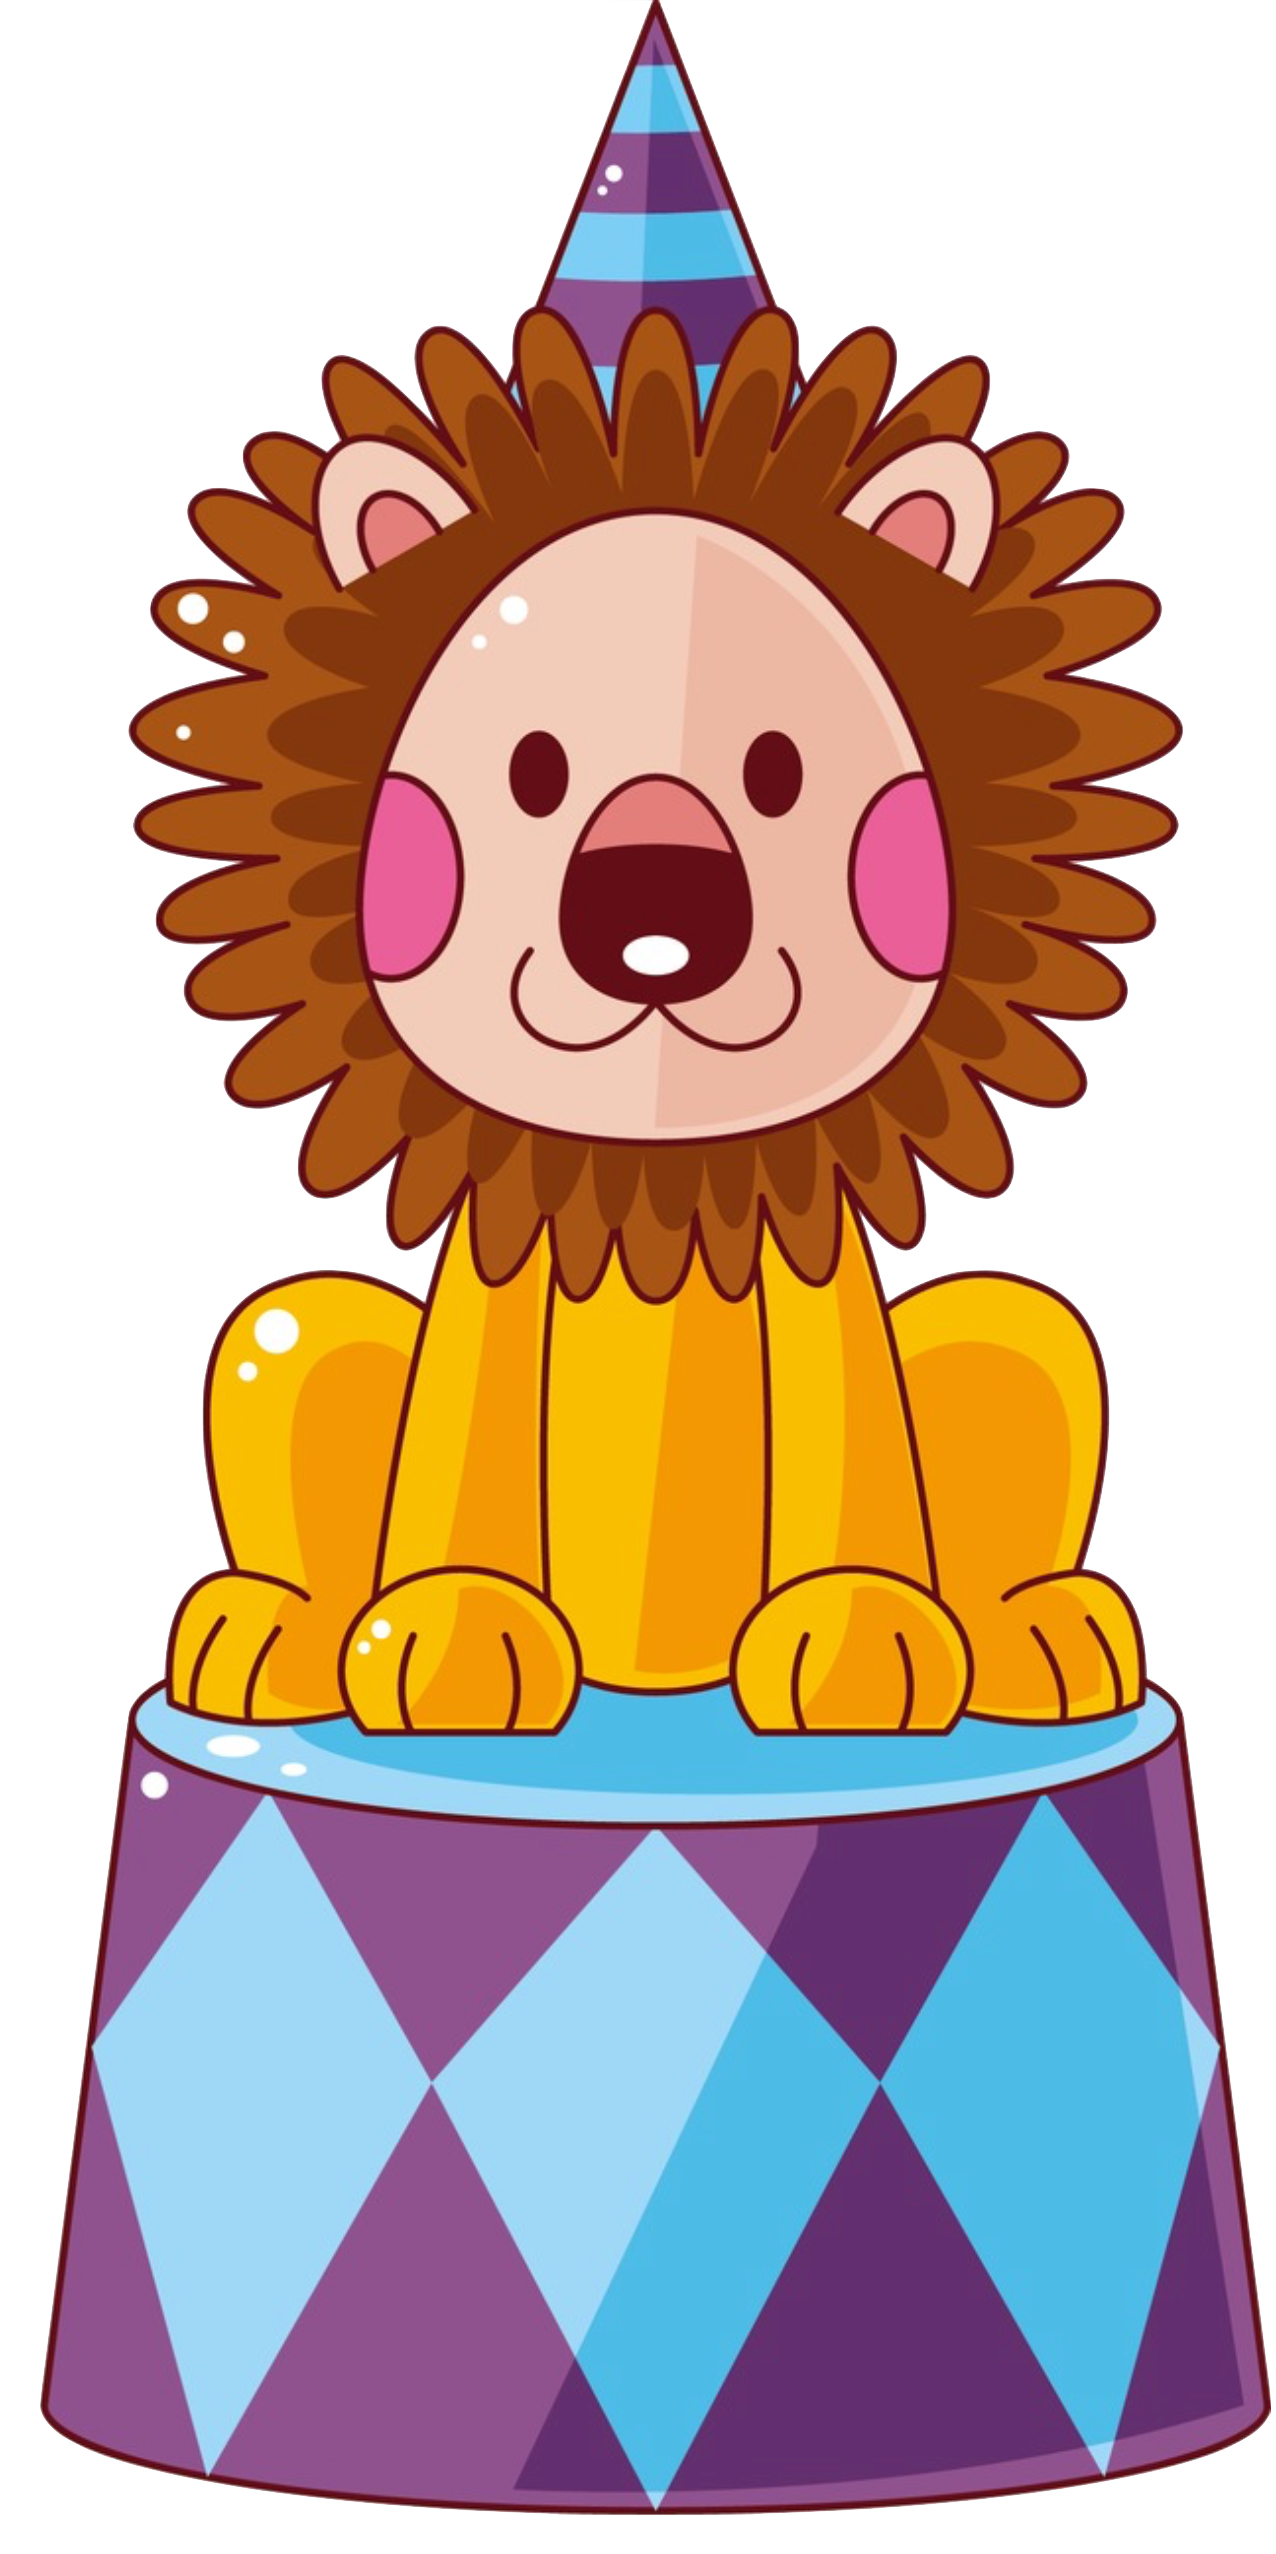 Cute Party Lion cartoon style for baby nursery or scrapbook cards birthday invitations